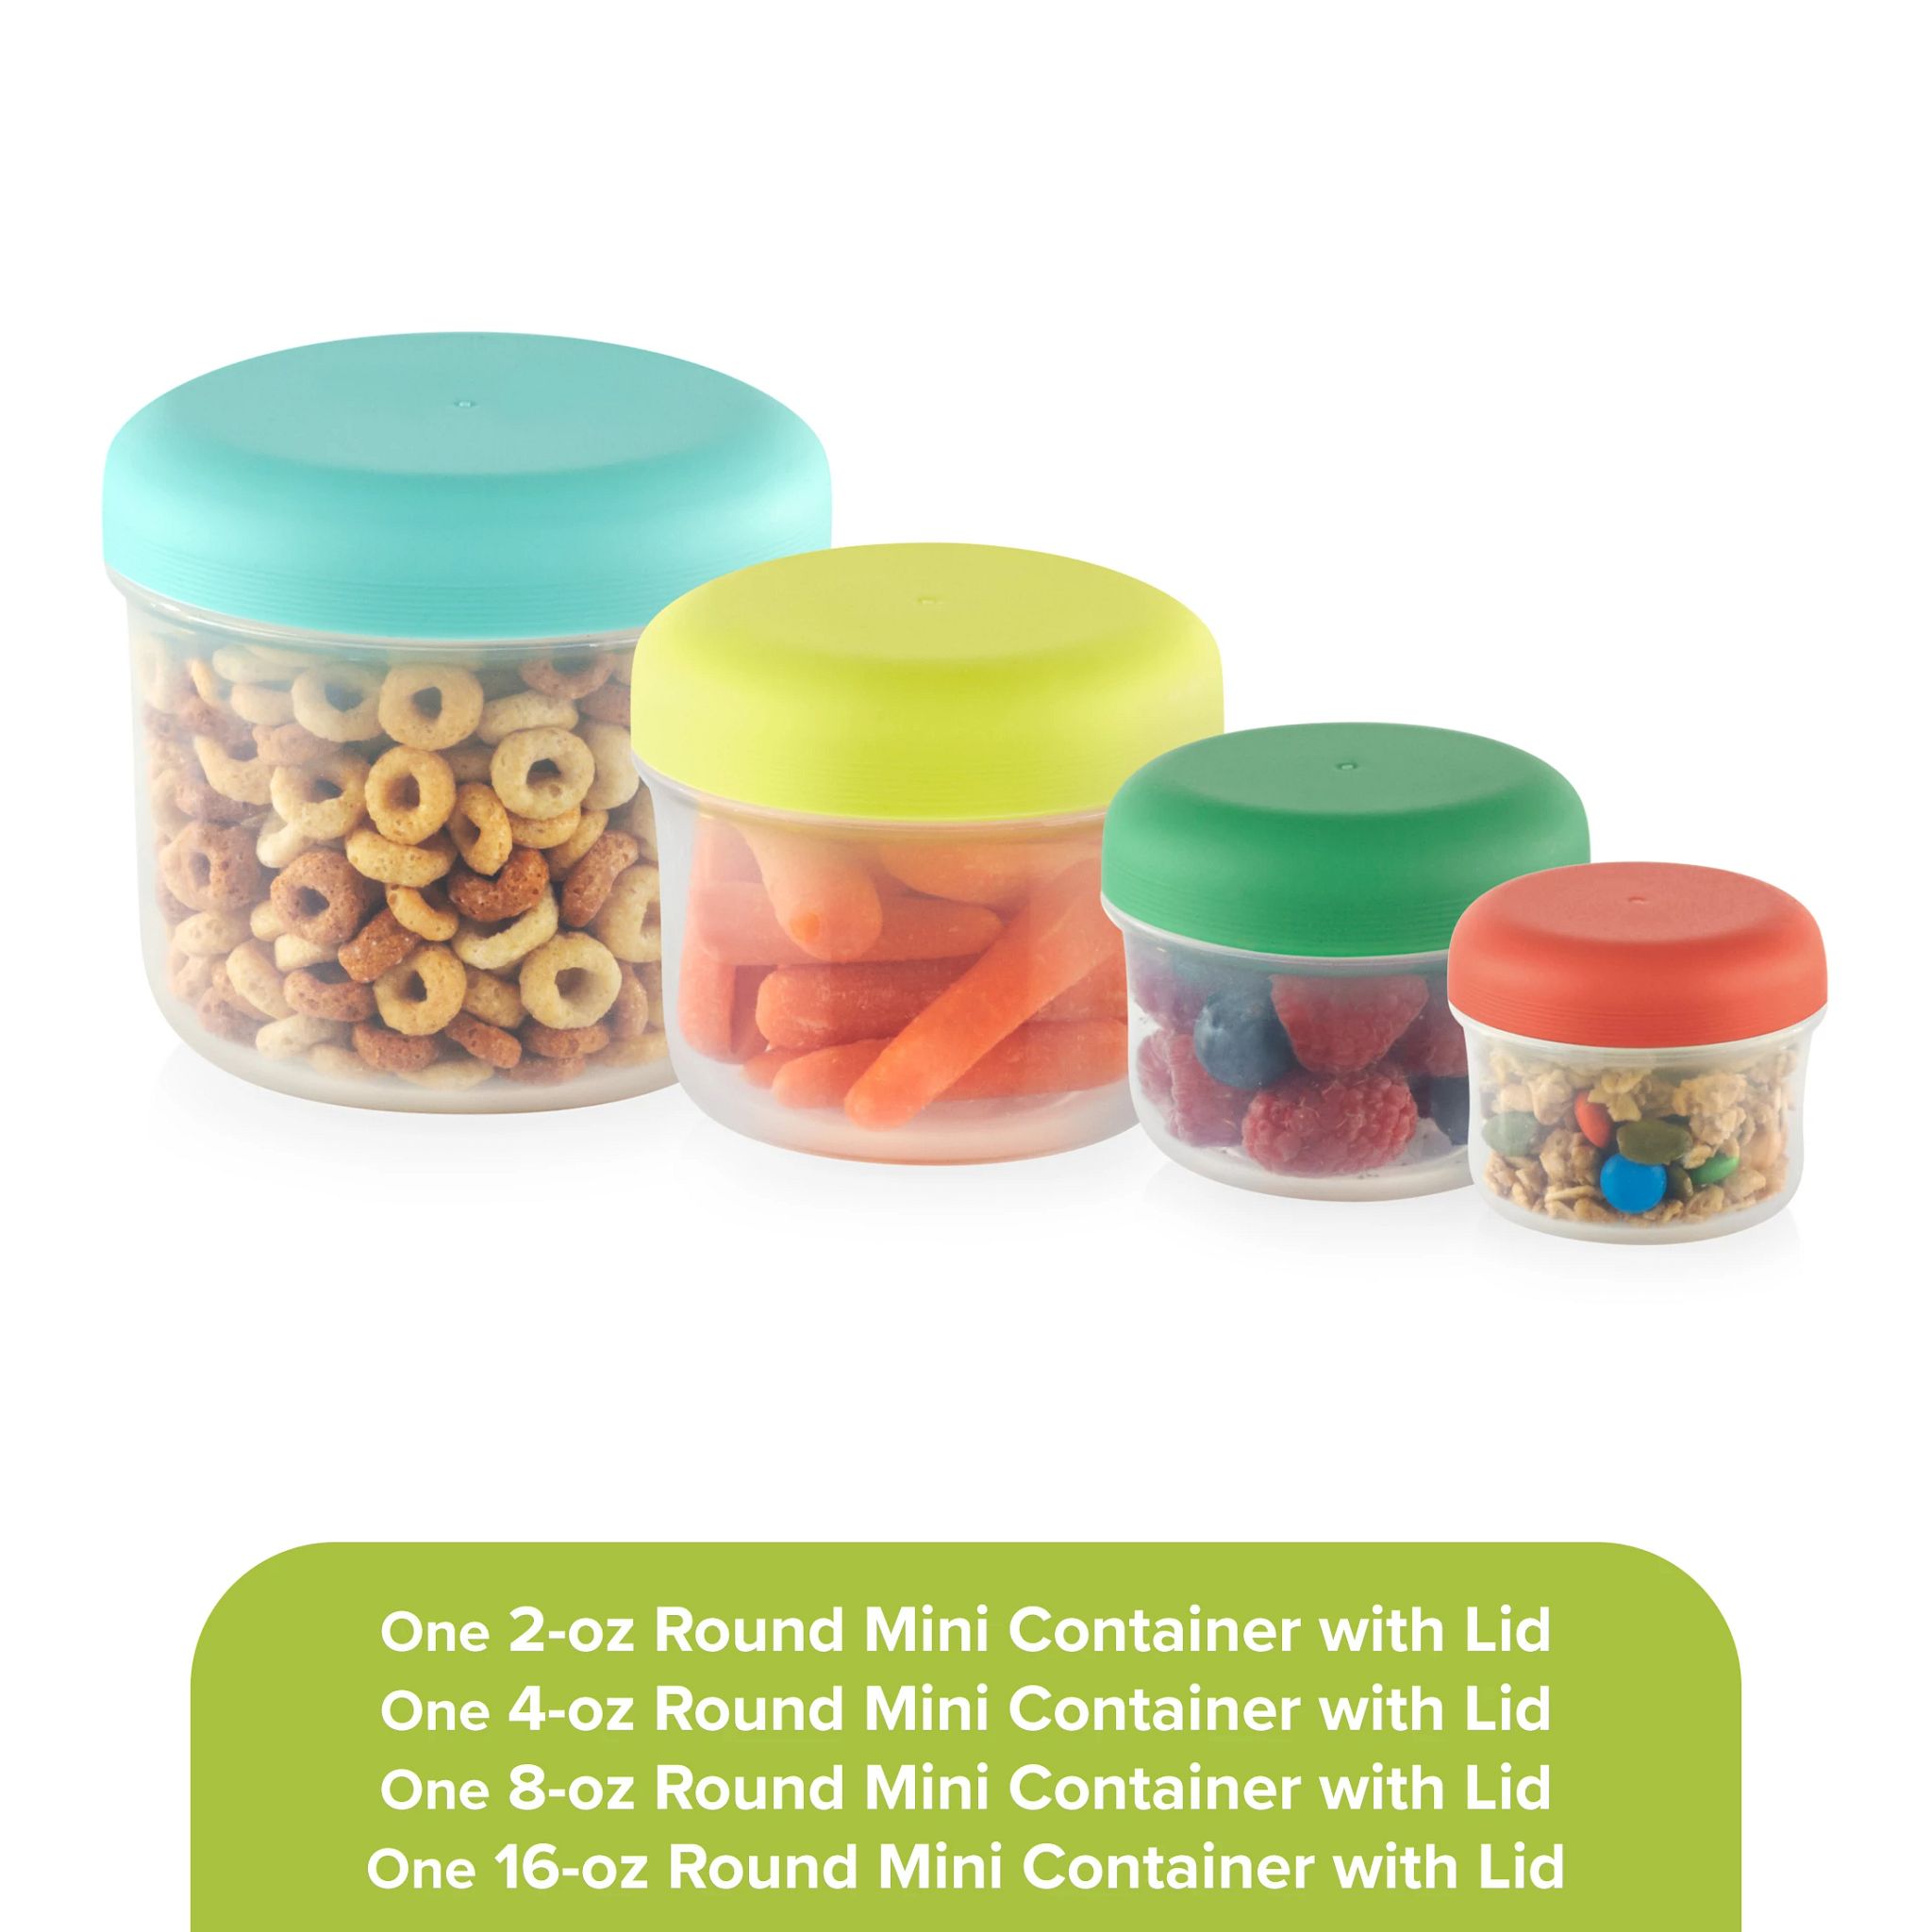 Snapware® Square Meal Prep Set Food Storage Containers, 5 pk - Fred Meyer